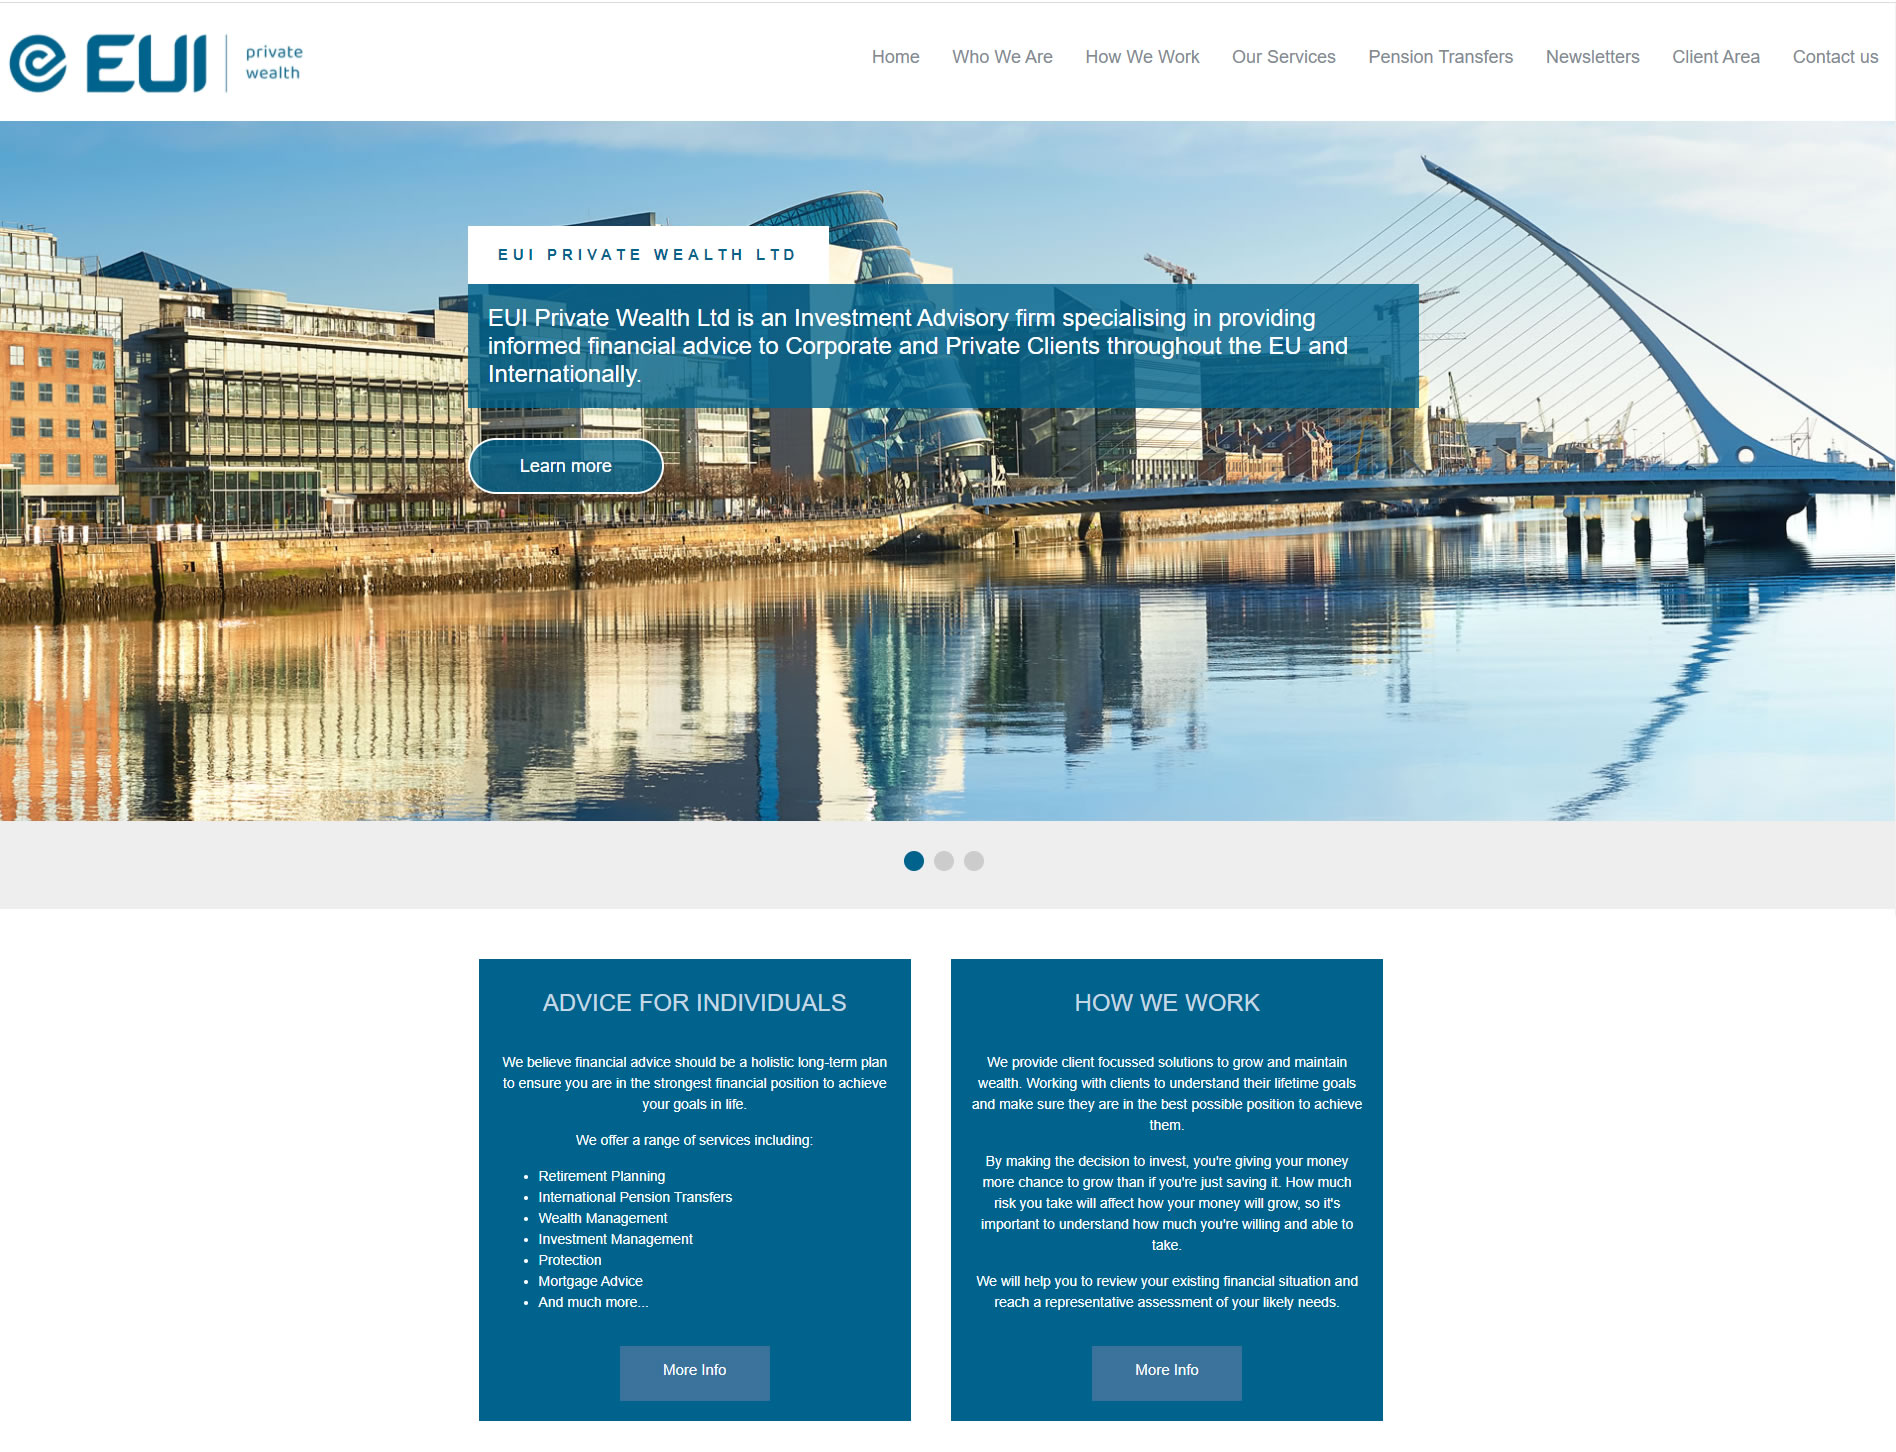 Corporate Wealth - one of our stunning IFA websites crafted from one of our adviser templates